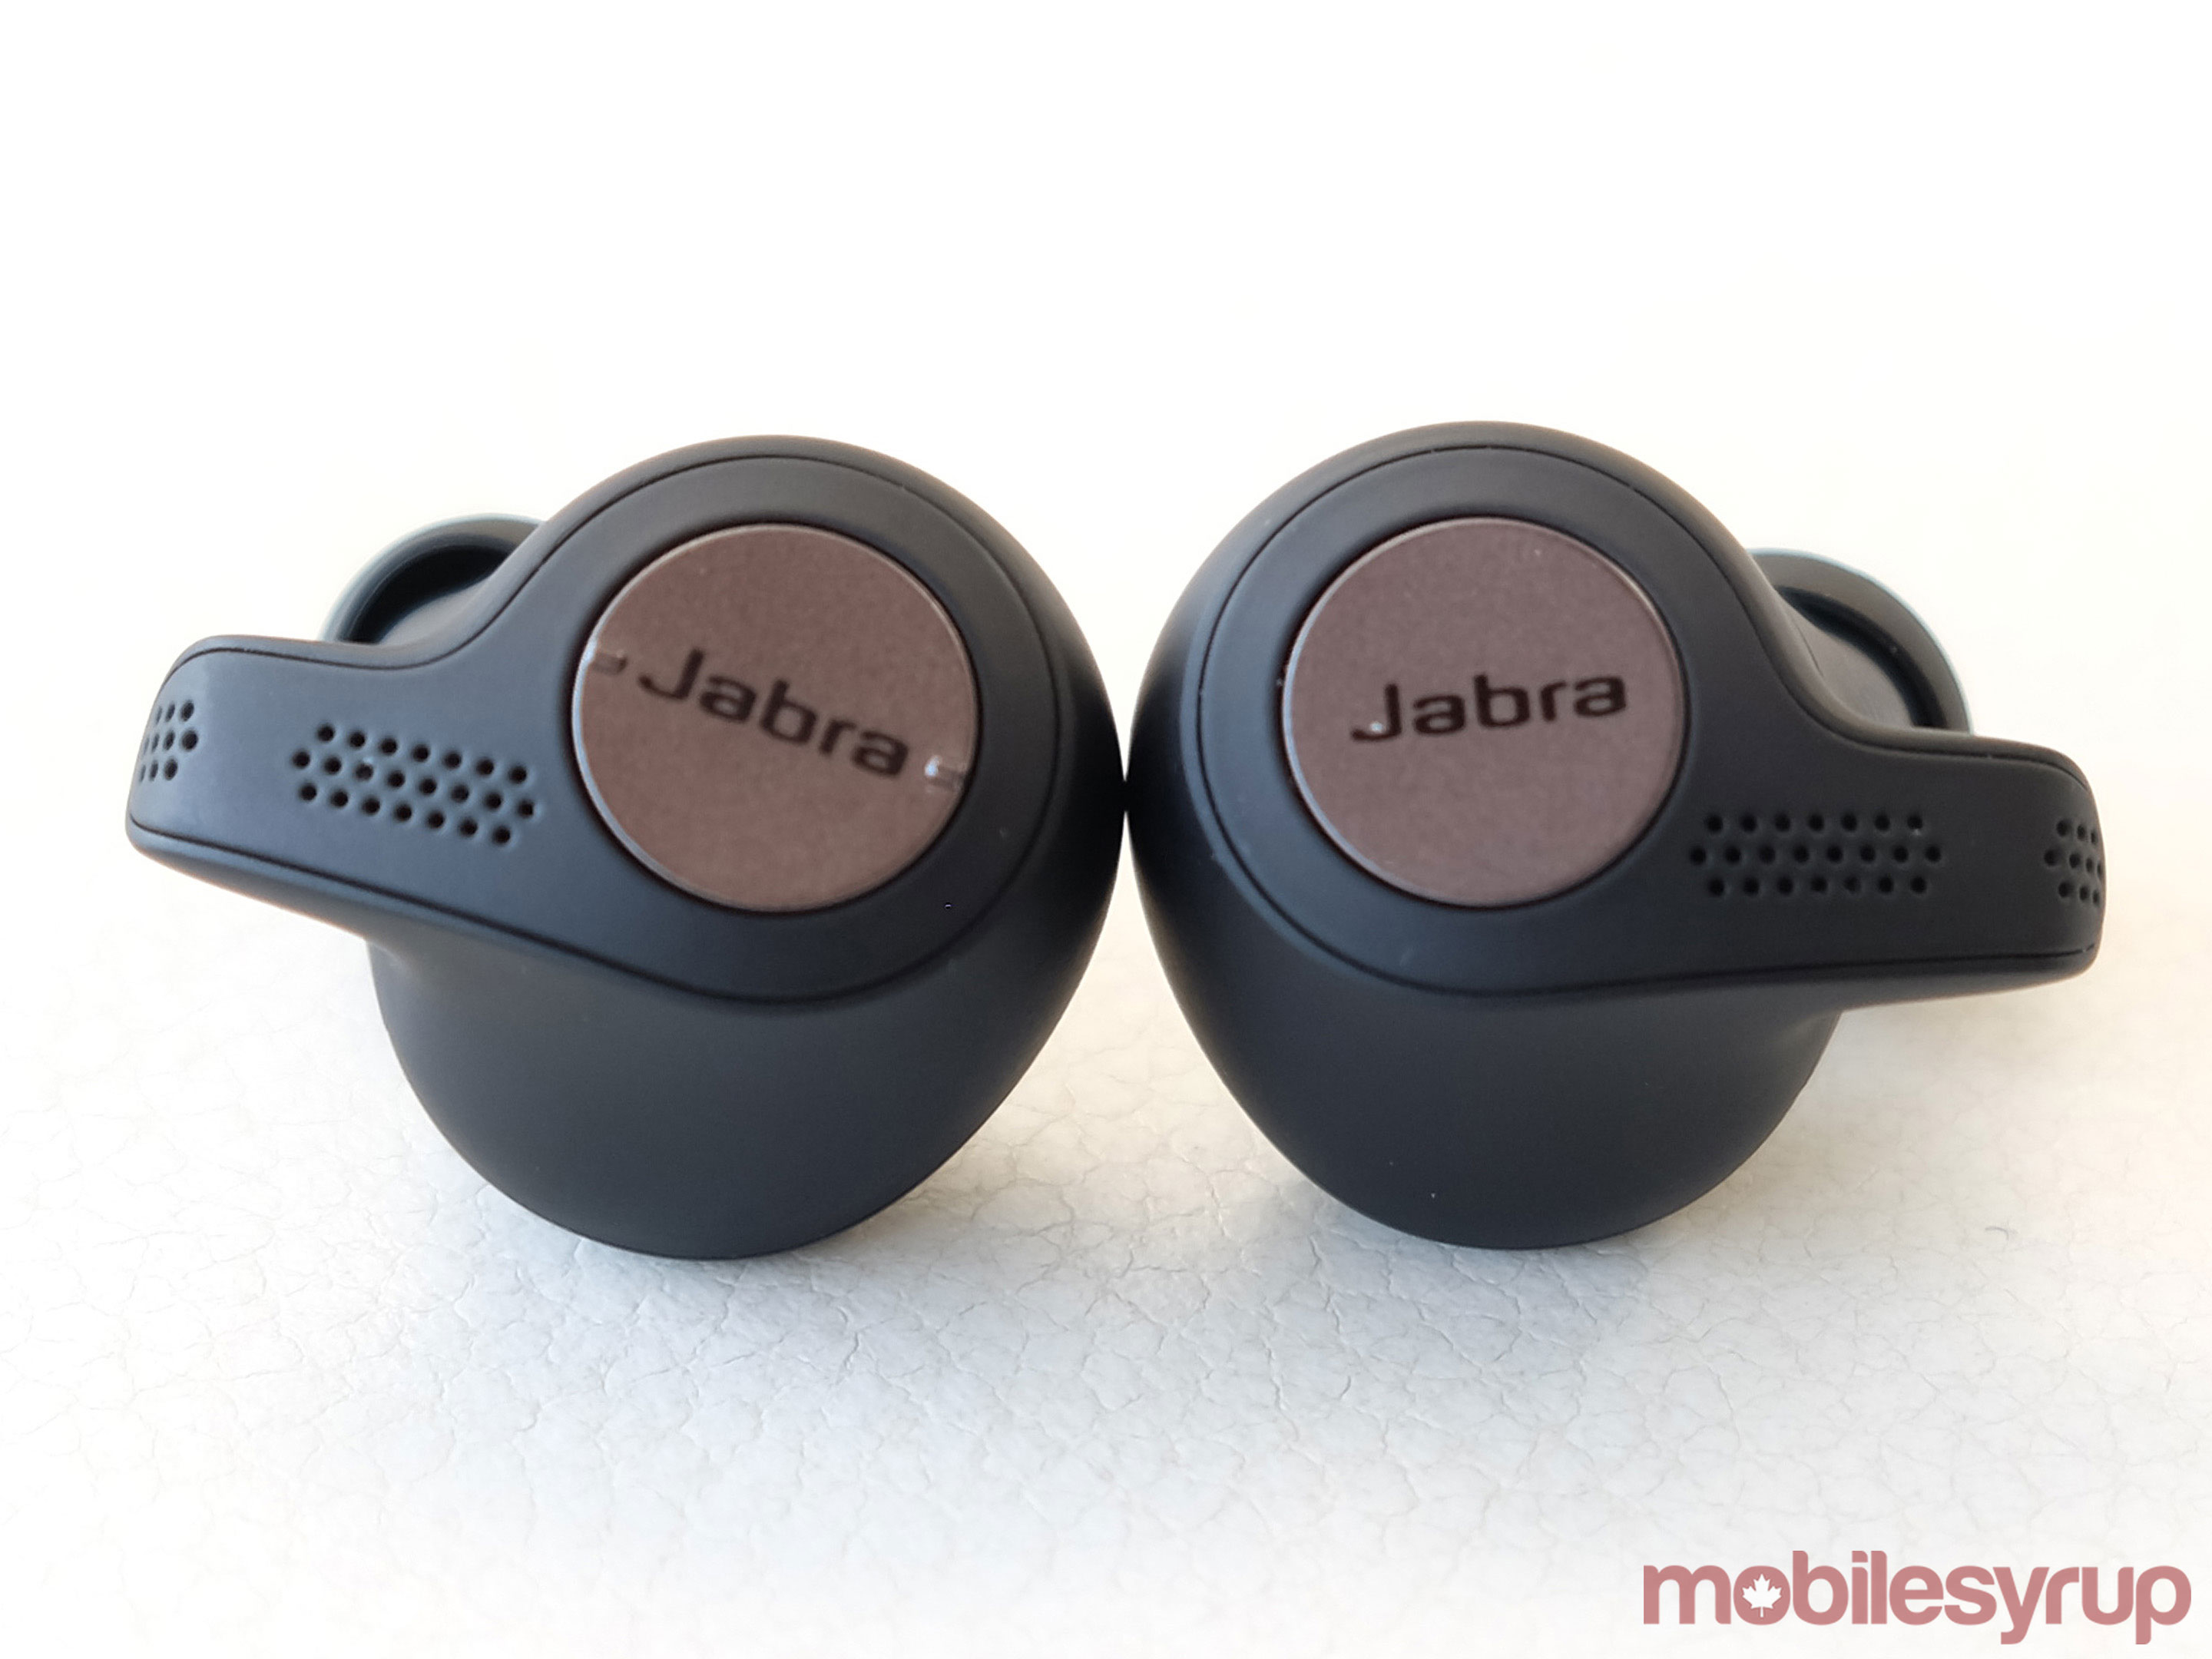 Jabra Elite 65t and Elite Active Review: Apple's AirPods